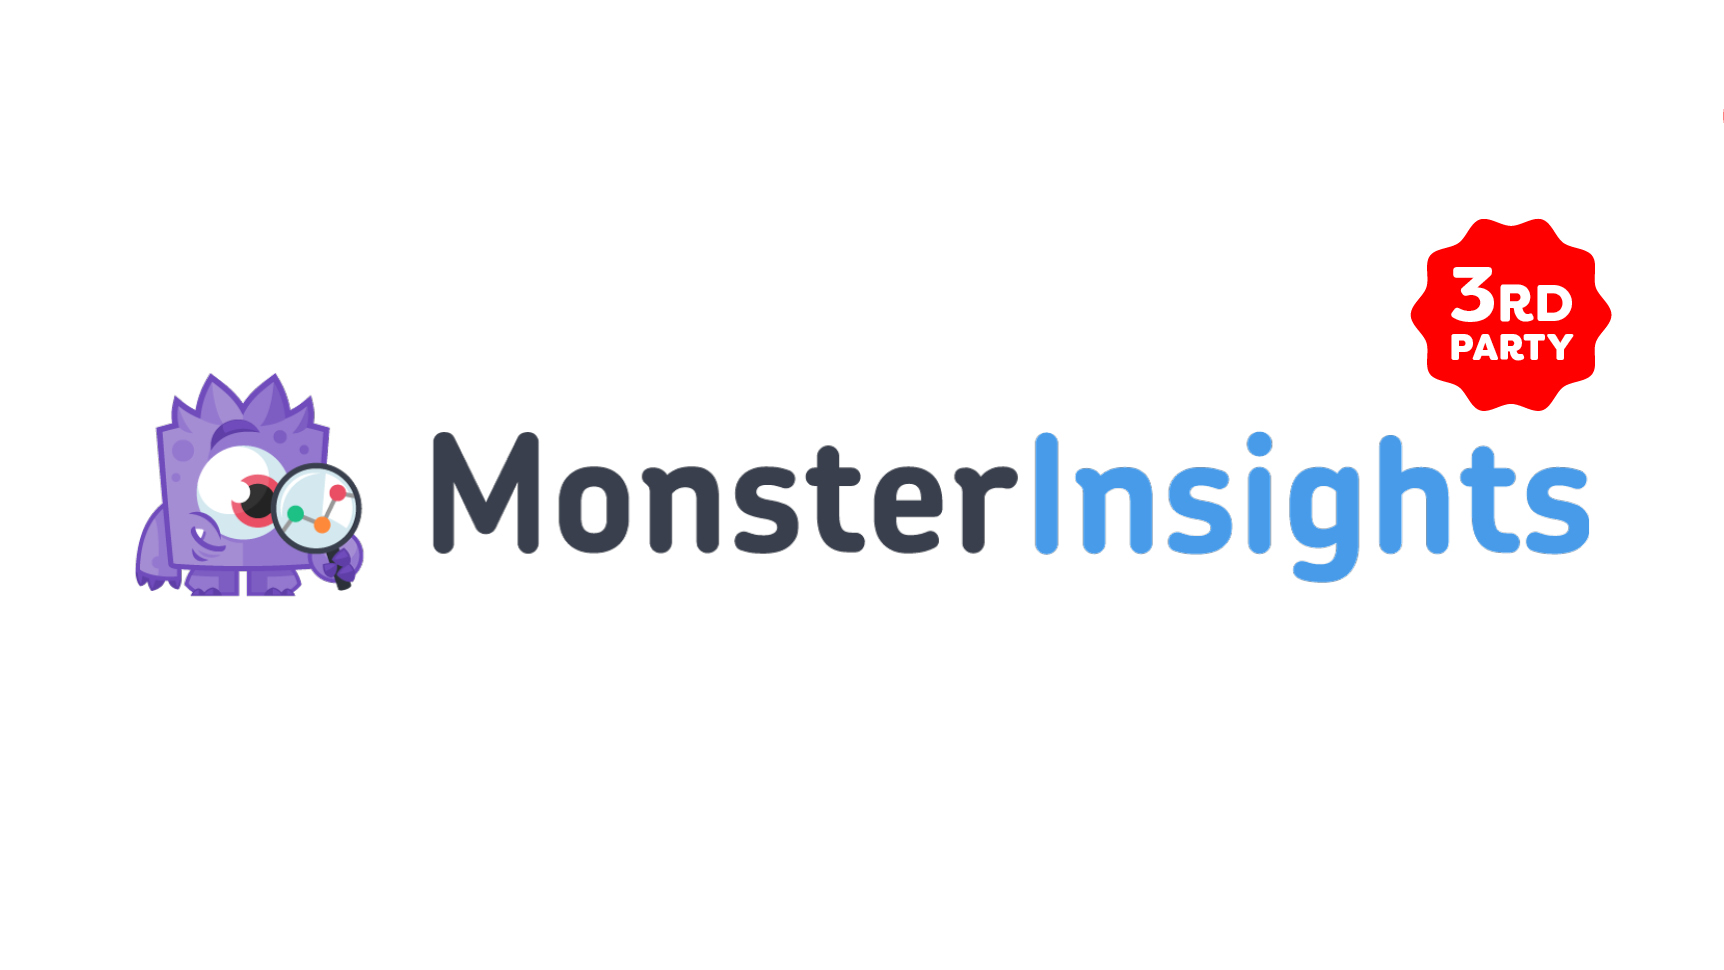 How Monsterinsights Can Help WordPress Users guage performance and Improve SEO